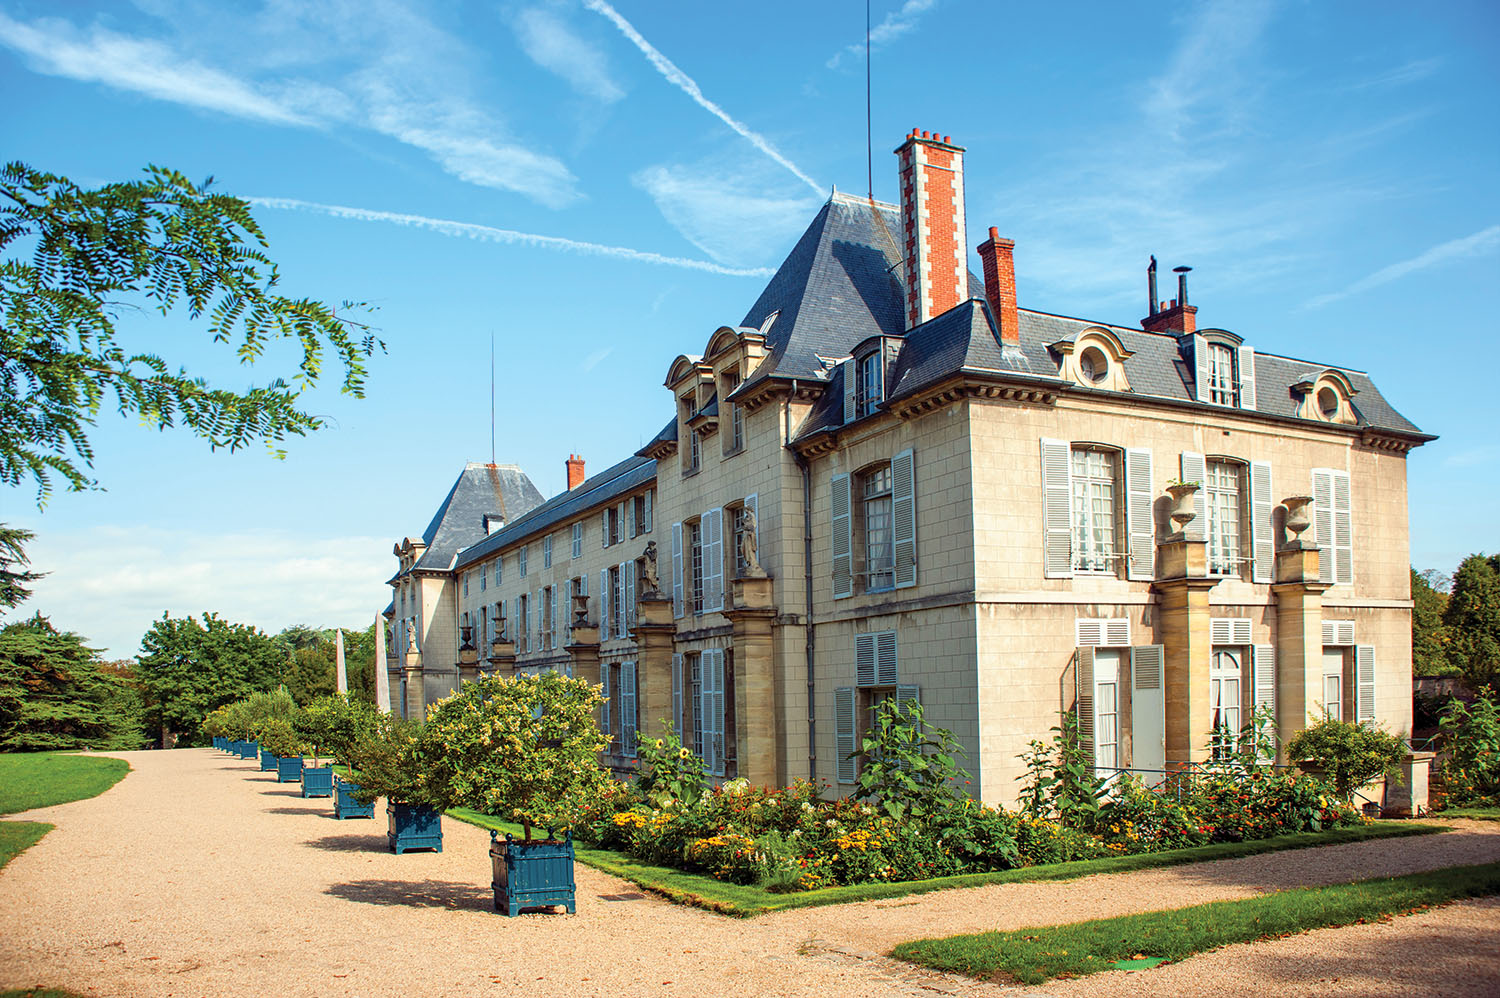 Chateau Malmaison stands tall with pale blue window shutters and orange trees lining its front.